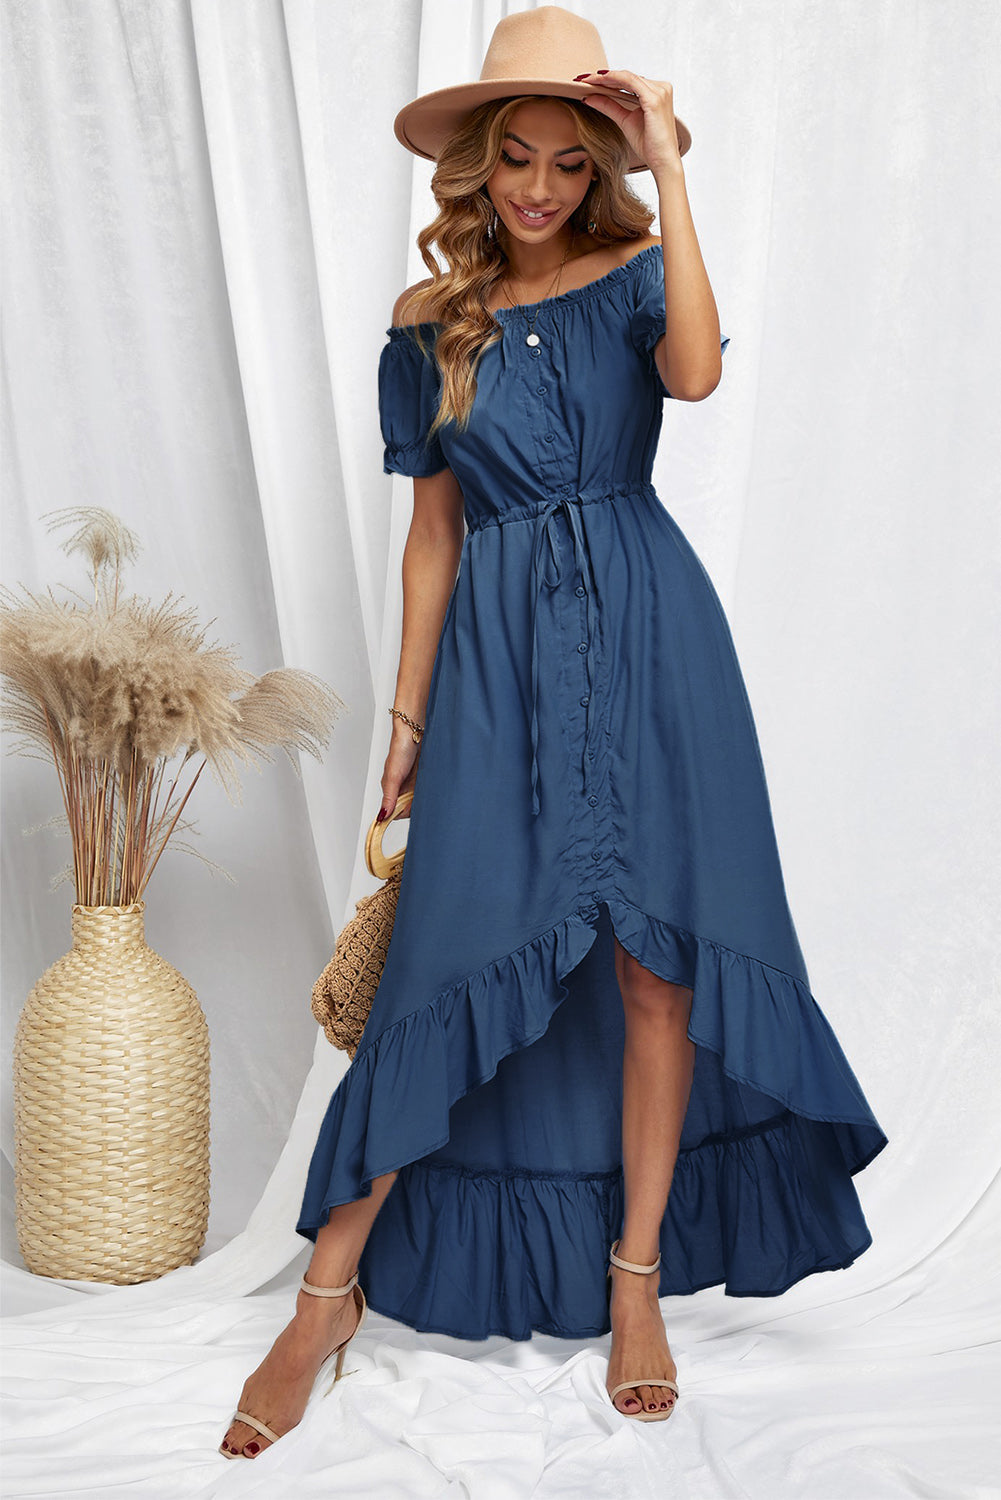 Blue White Off the Shoulder Dress High Low Maxi Dress  LC611566-5